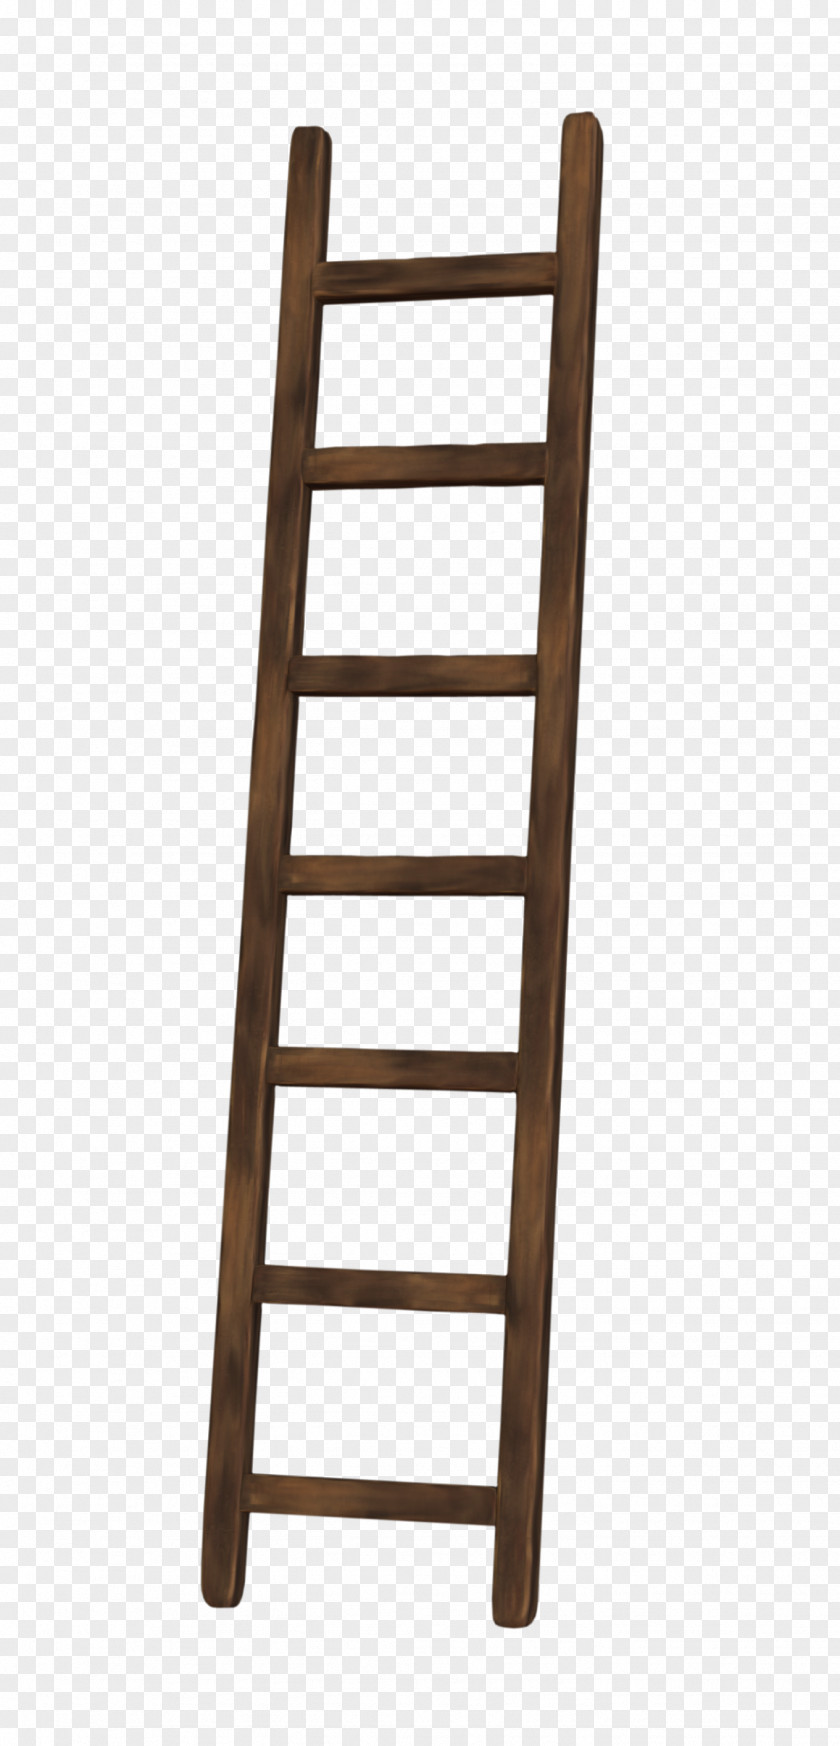 Ladder Wood Stairs Stair Riser PNG